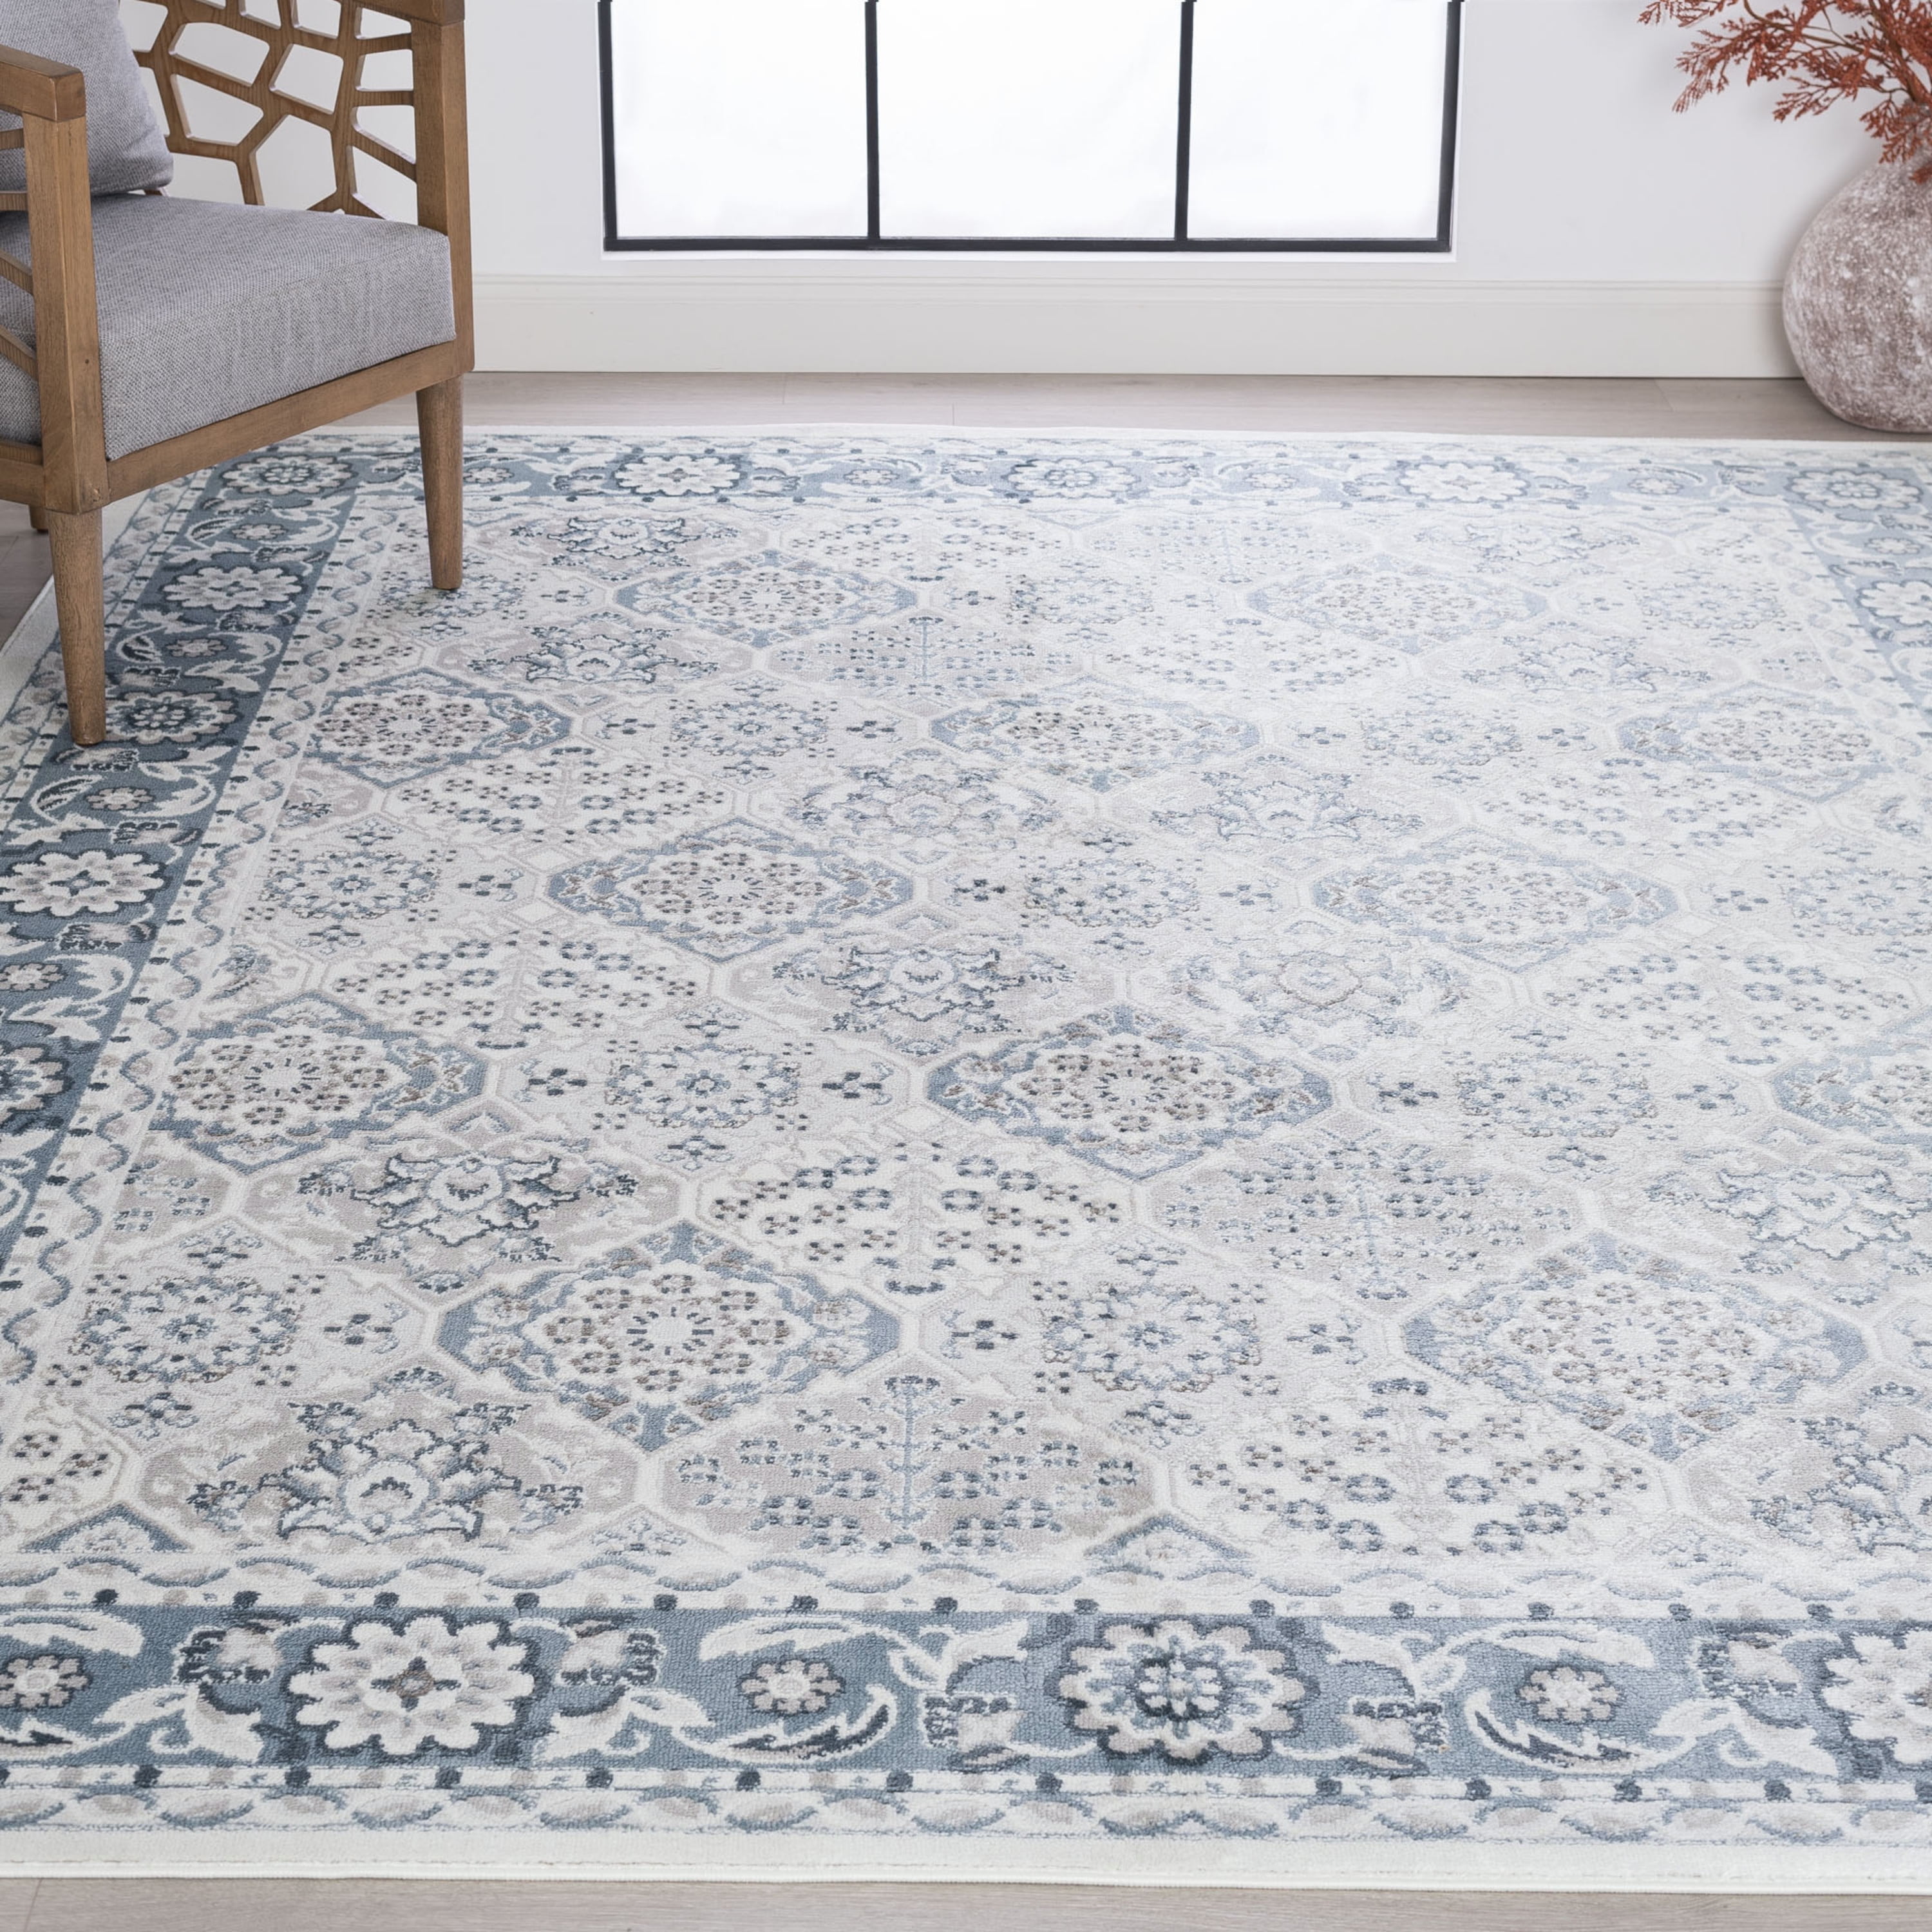 Traditional 9x12 Area Rug 8 9 X 12 2, 8 By 12 Rug